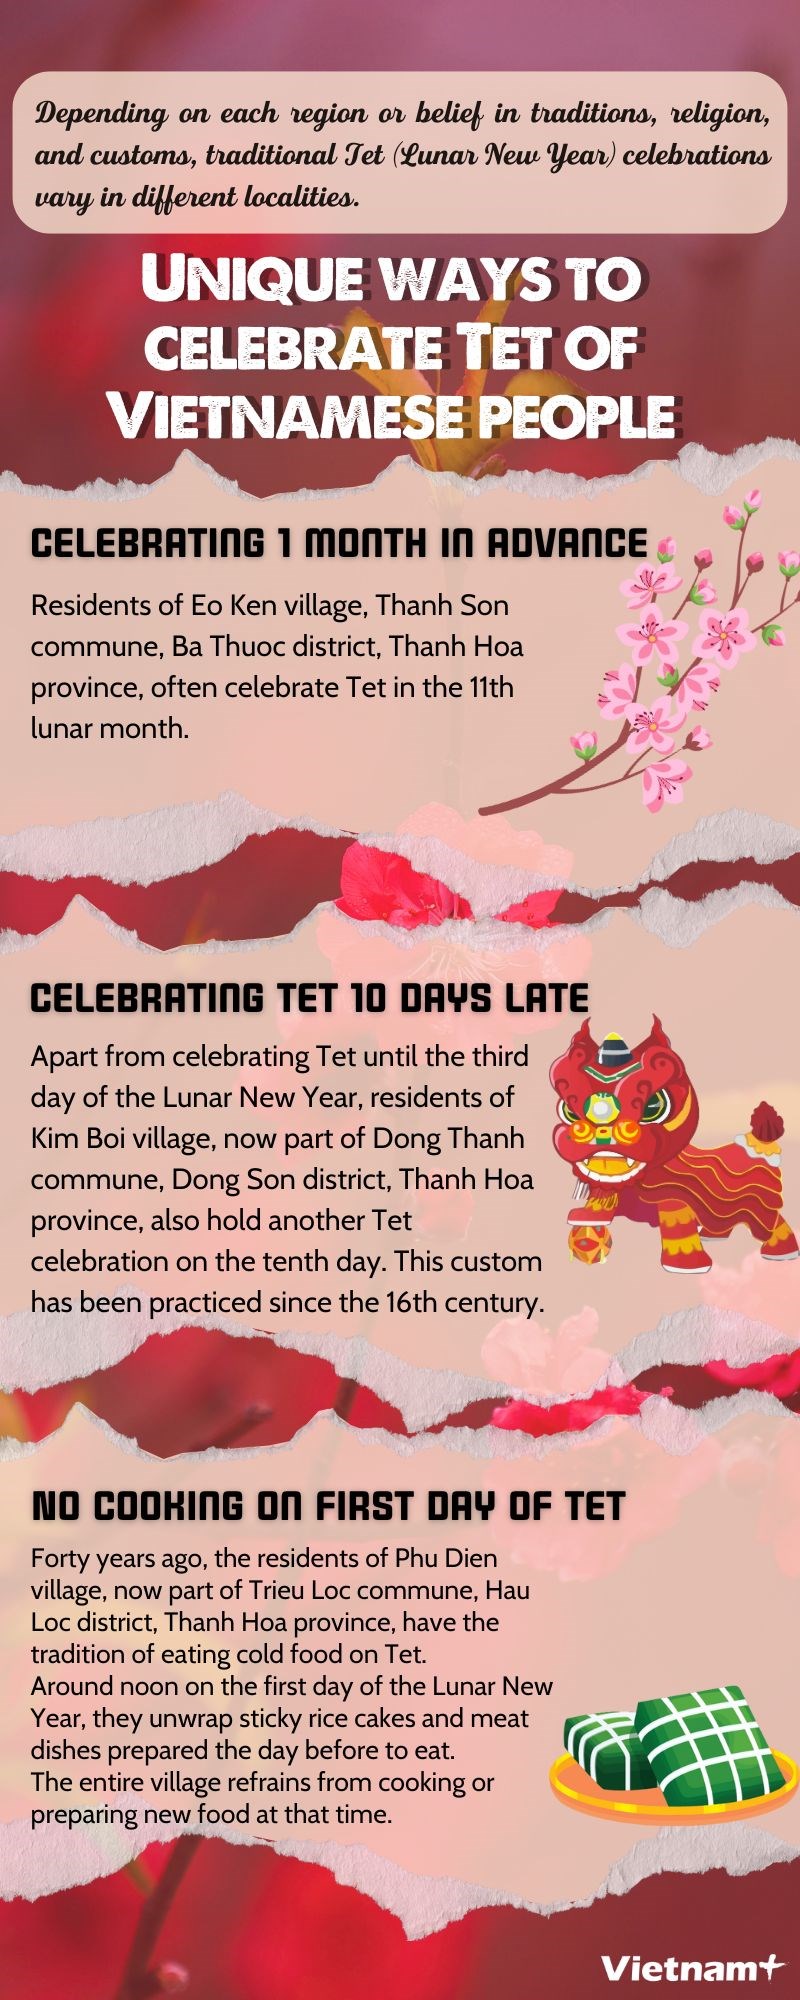 Unique ways to celebrate Lunar New Year of Vietnamese people hinh anh 1